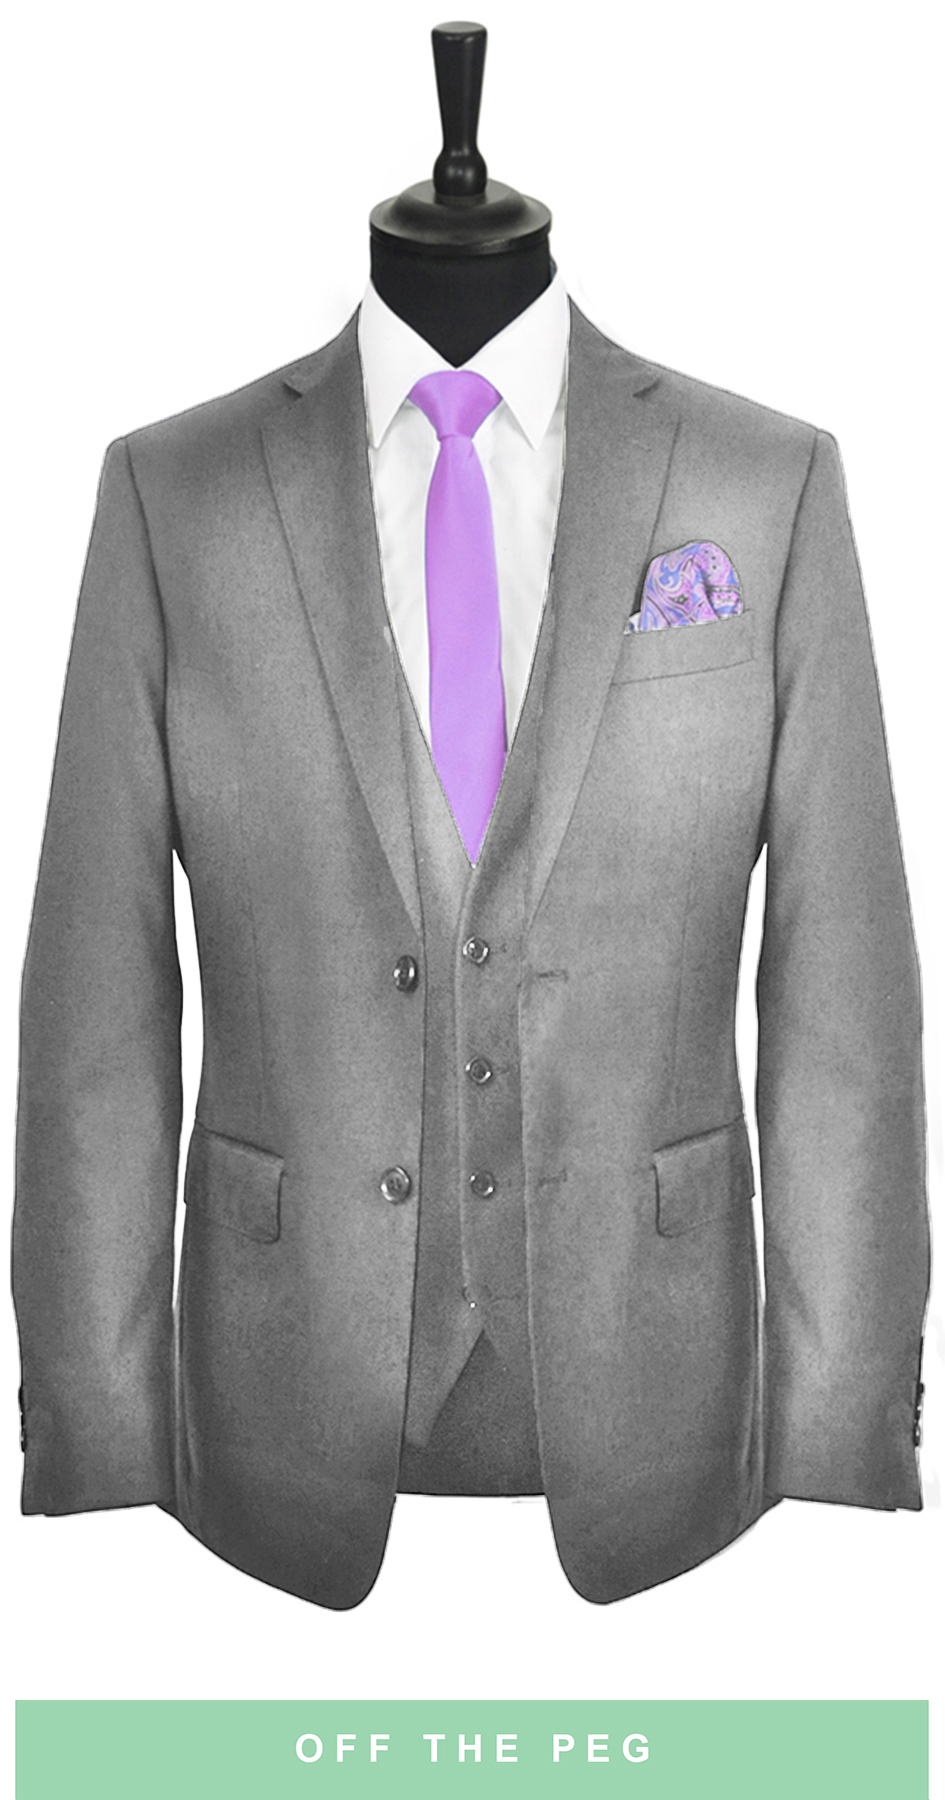 Silver Gray 2 Button Suits Starting At $199 - Mensuits.com